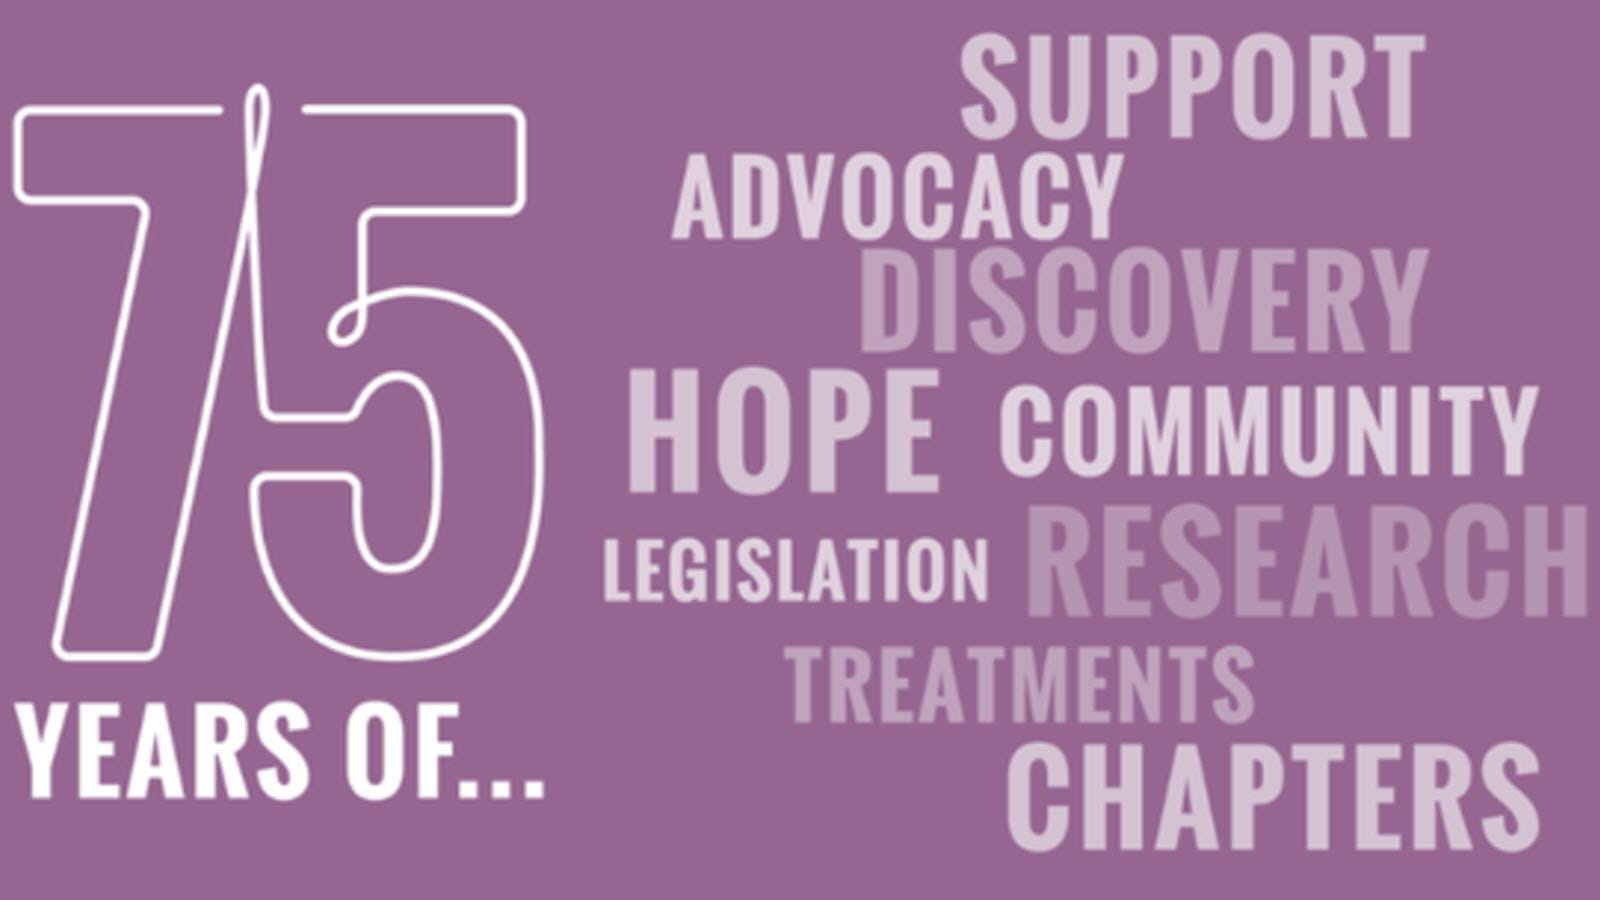 75 Years of Support, Advocacy, Discovery, Hope, Community, Legislation, Research, Treatments, Chapters